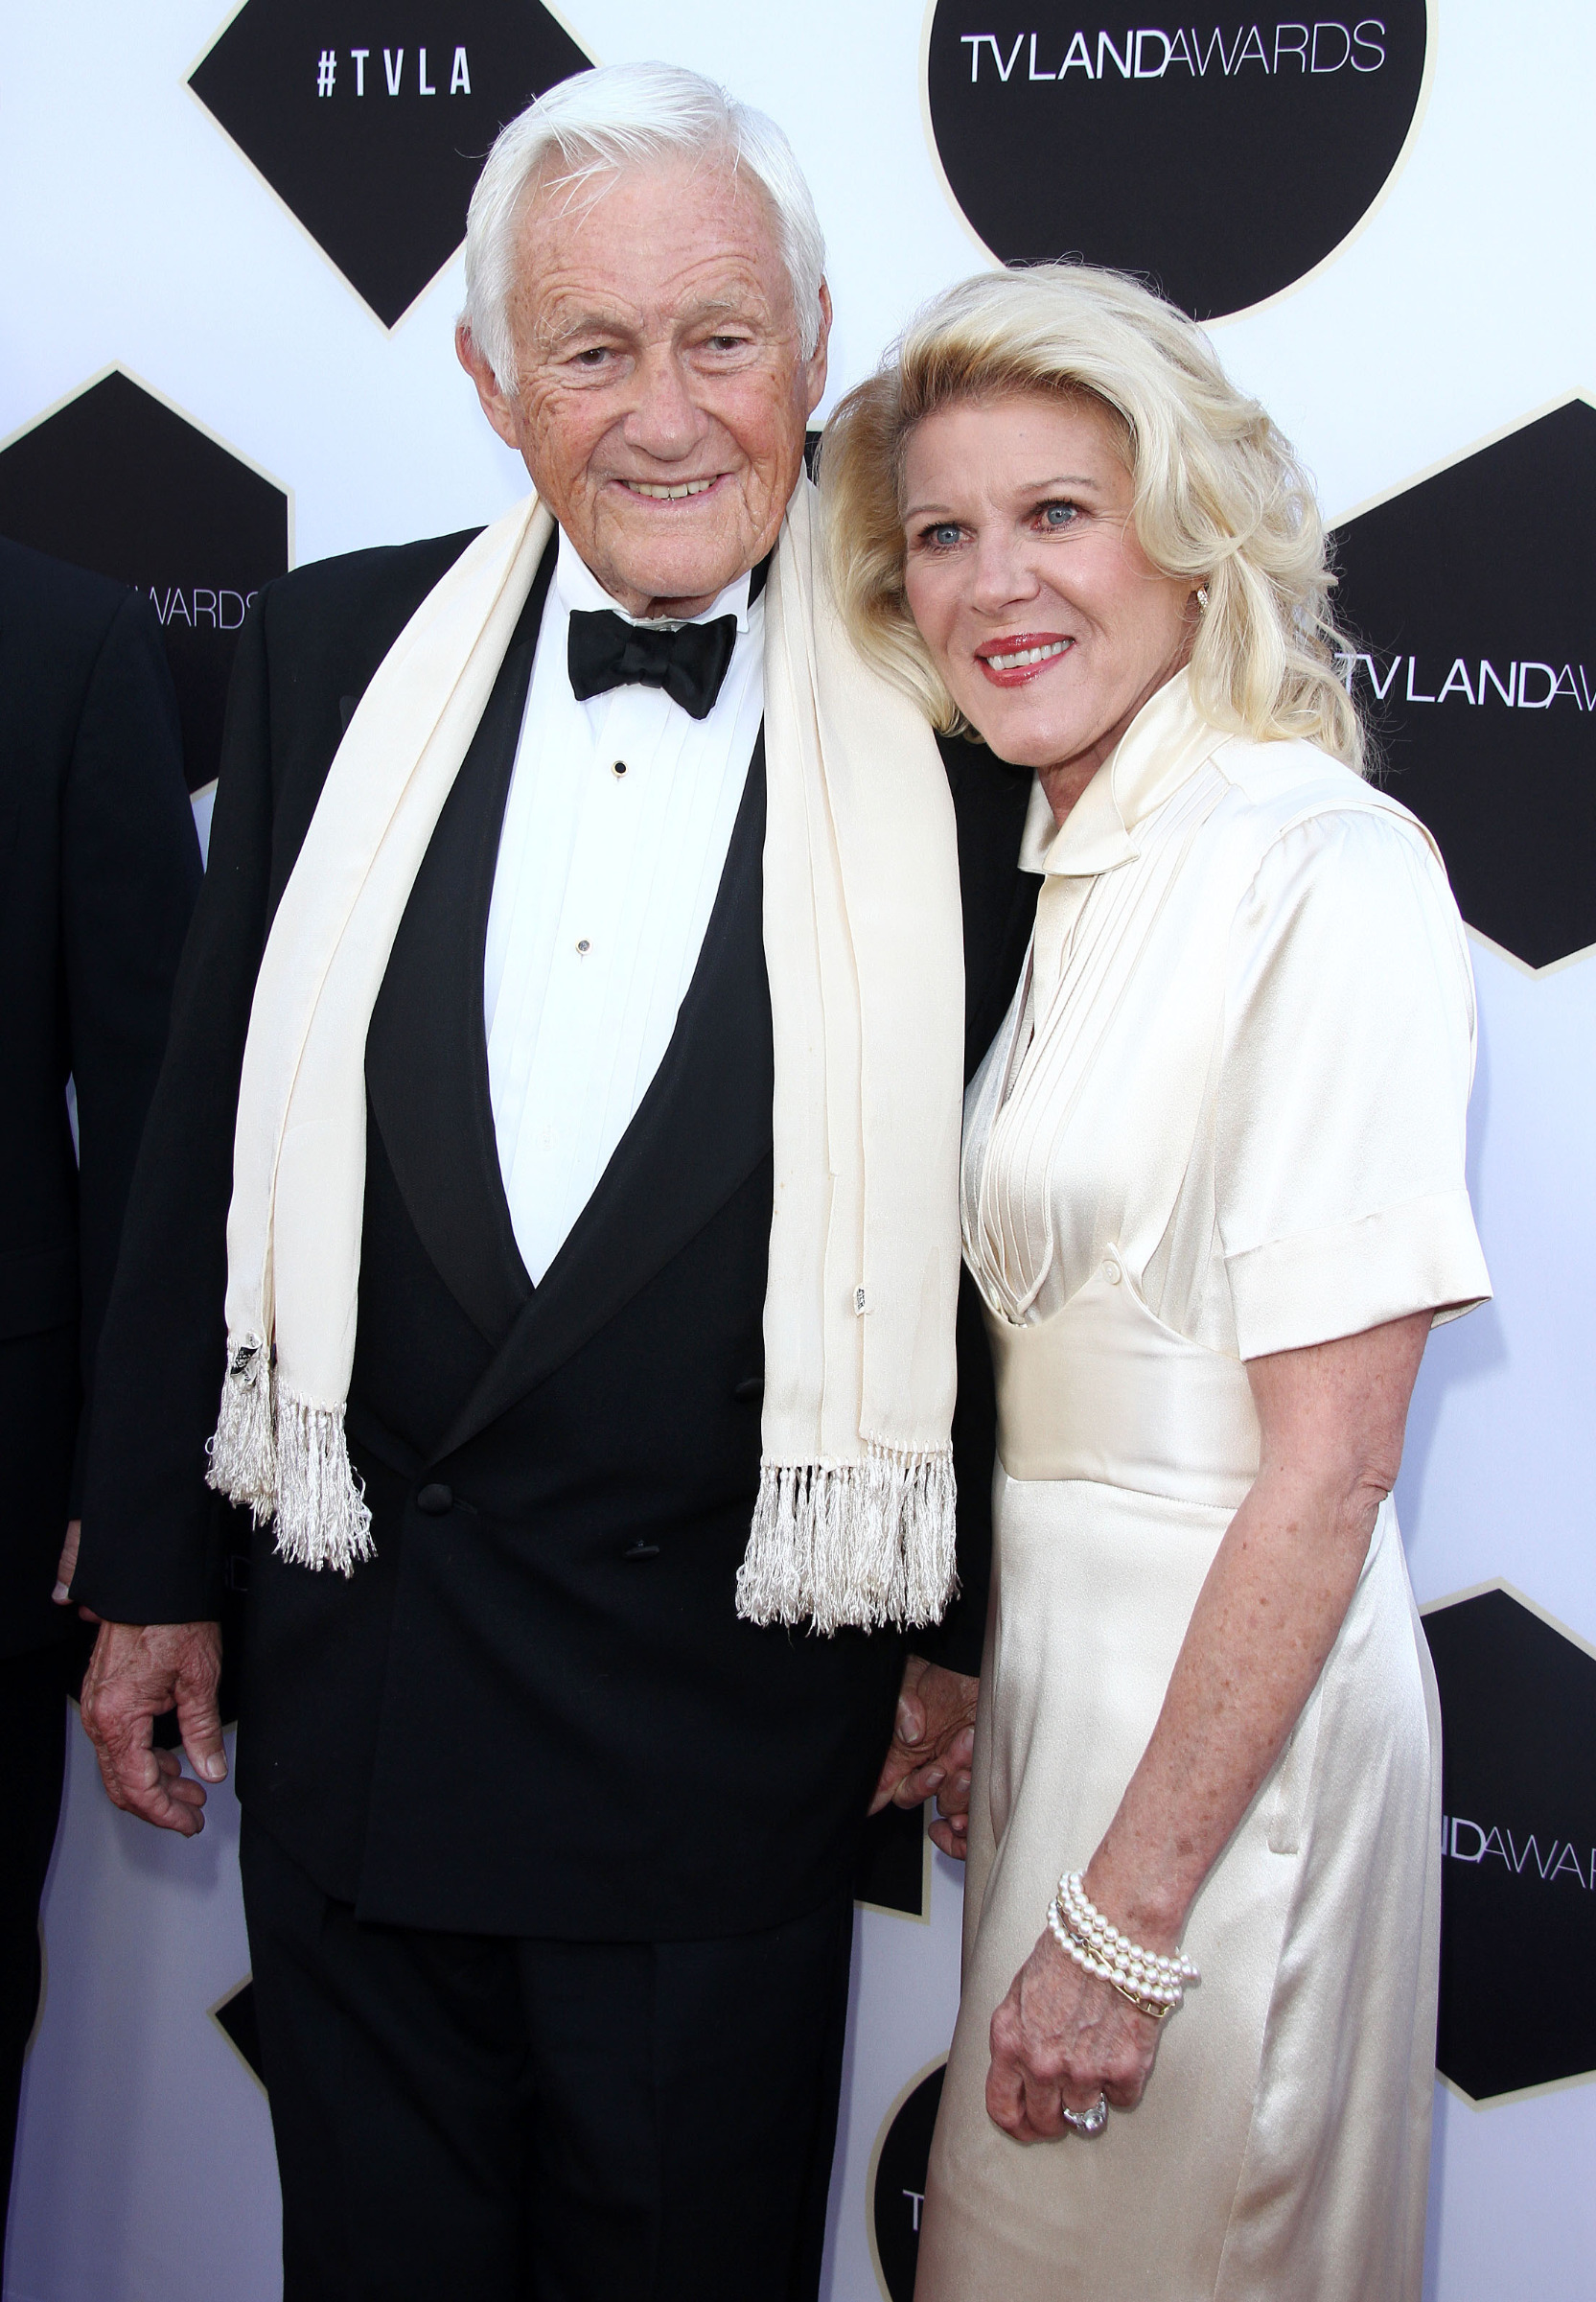 135456, Alley Mills, Orson Bean attends The 2015 TV LAND AWARDS in Los Angeles on Saturday, April 11th, 2015., Image: 238378062, License: Rights-managed, Restrictions: , Model Release: no, Credit line: PacificCoastNews / Pacific coast news / Profimedia